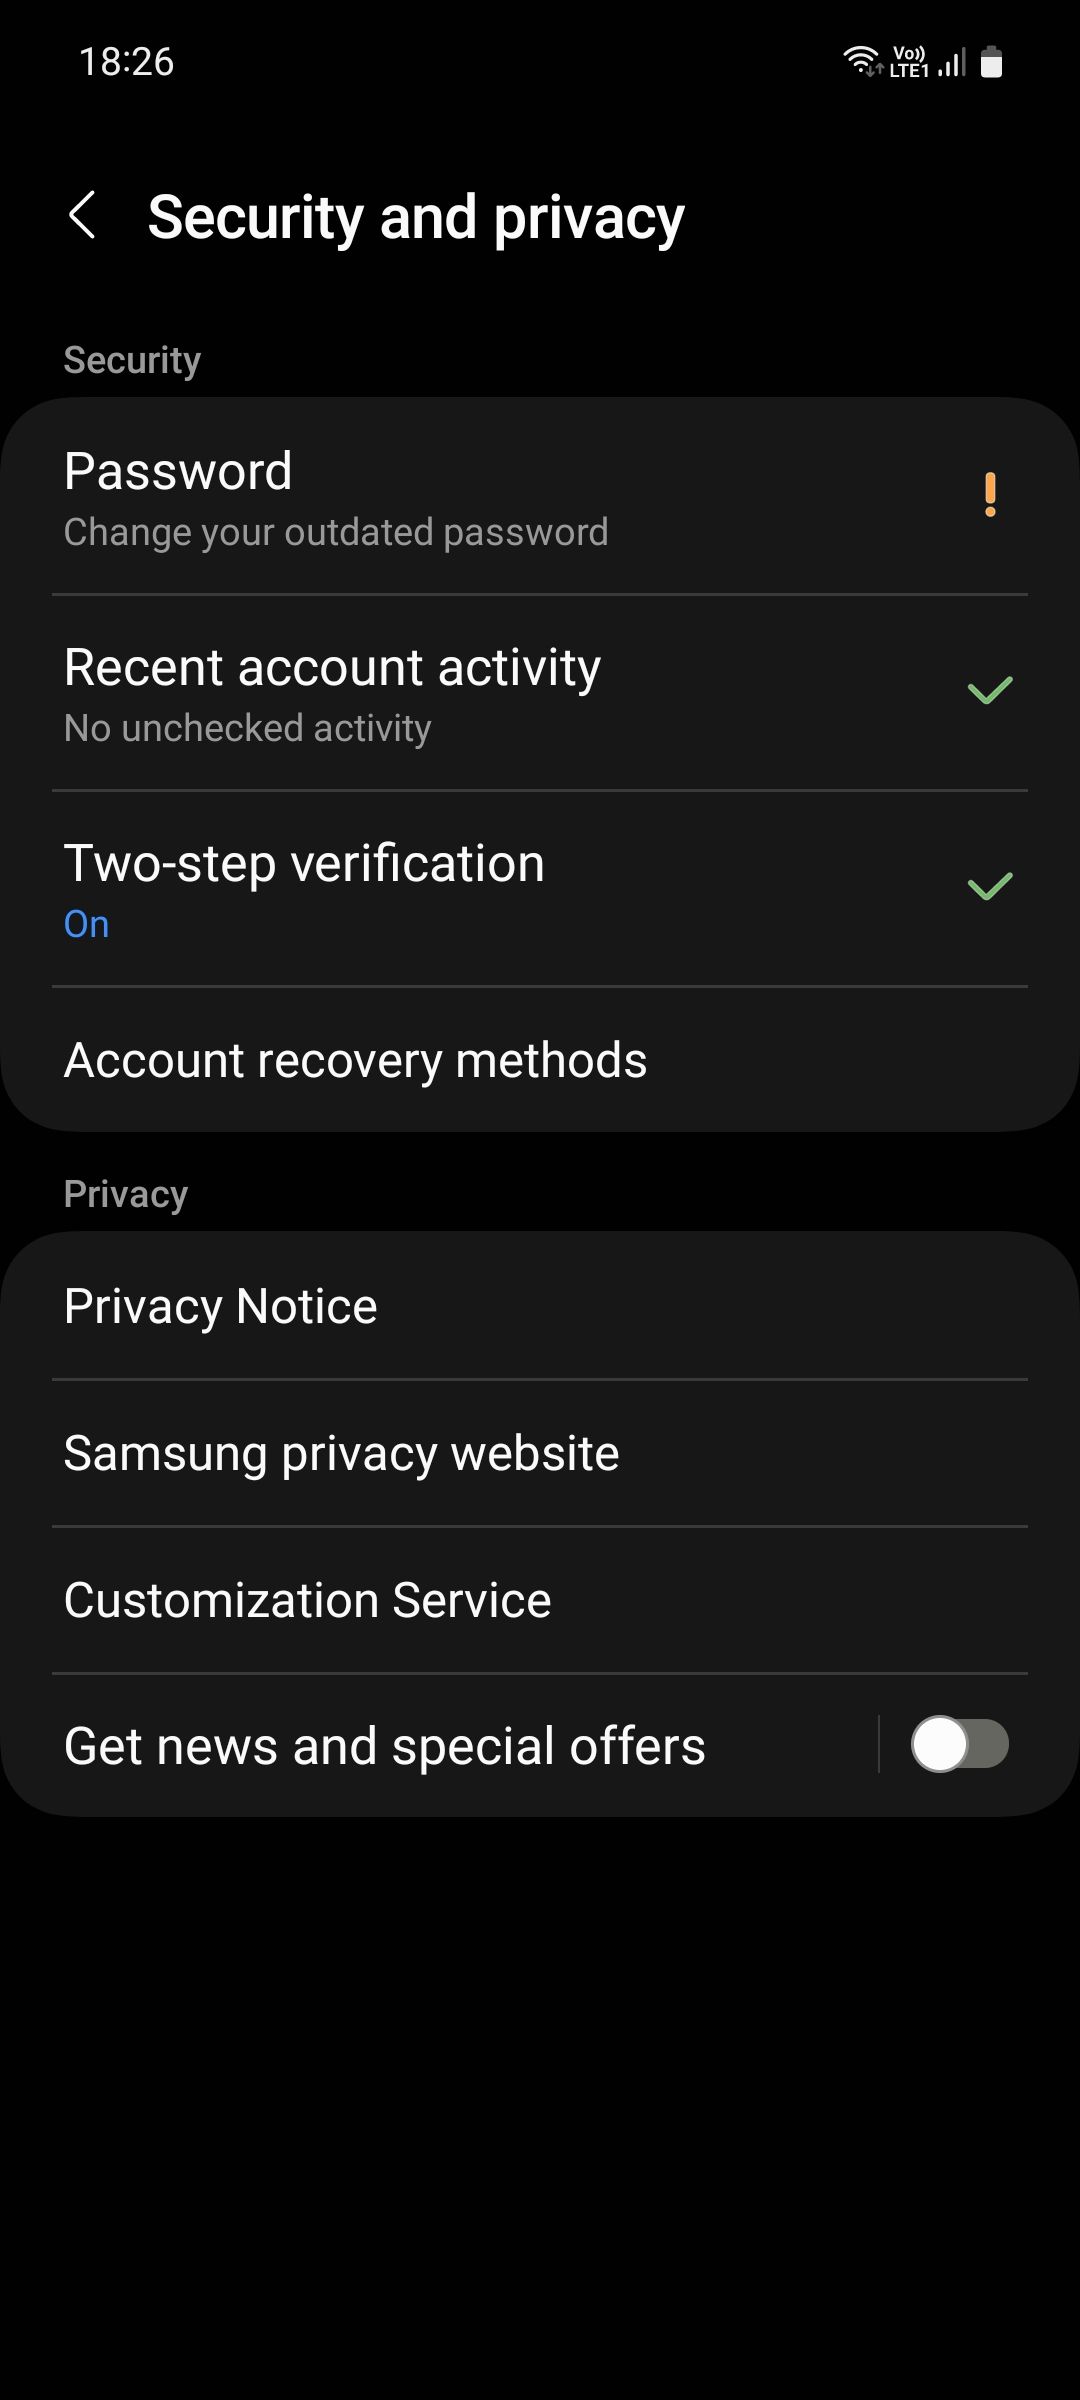 Samsung account Security and privacy menu